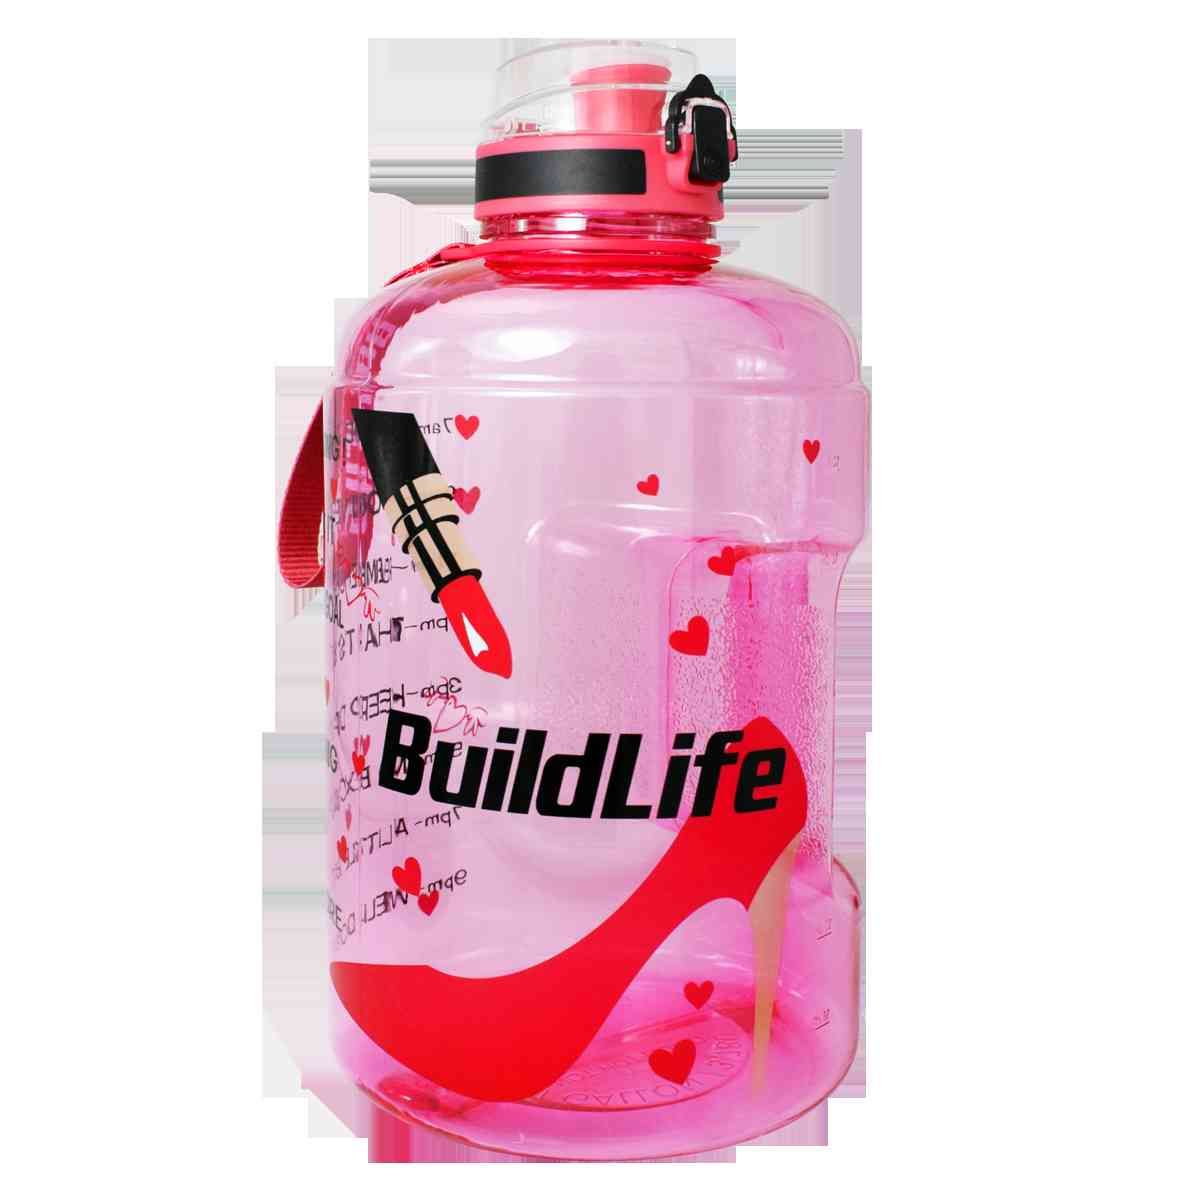 Reusable Glass Water Bottle High Quality 450ml with Lid Hello Master Graphic